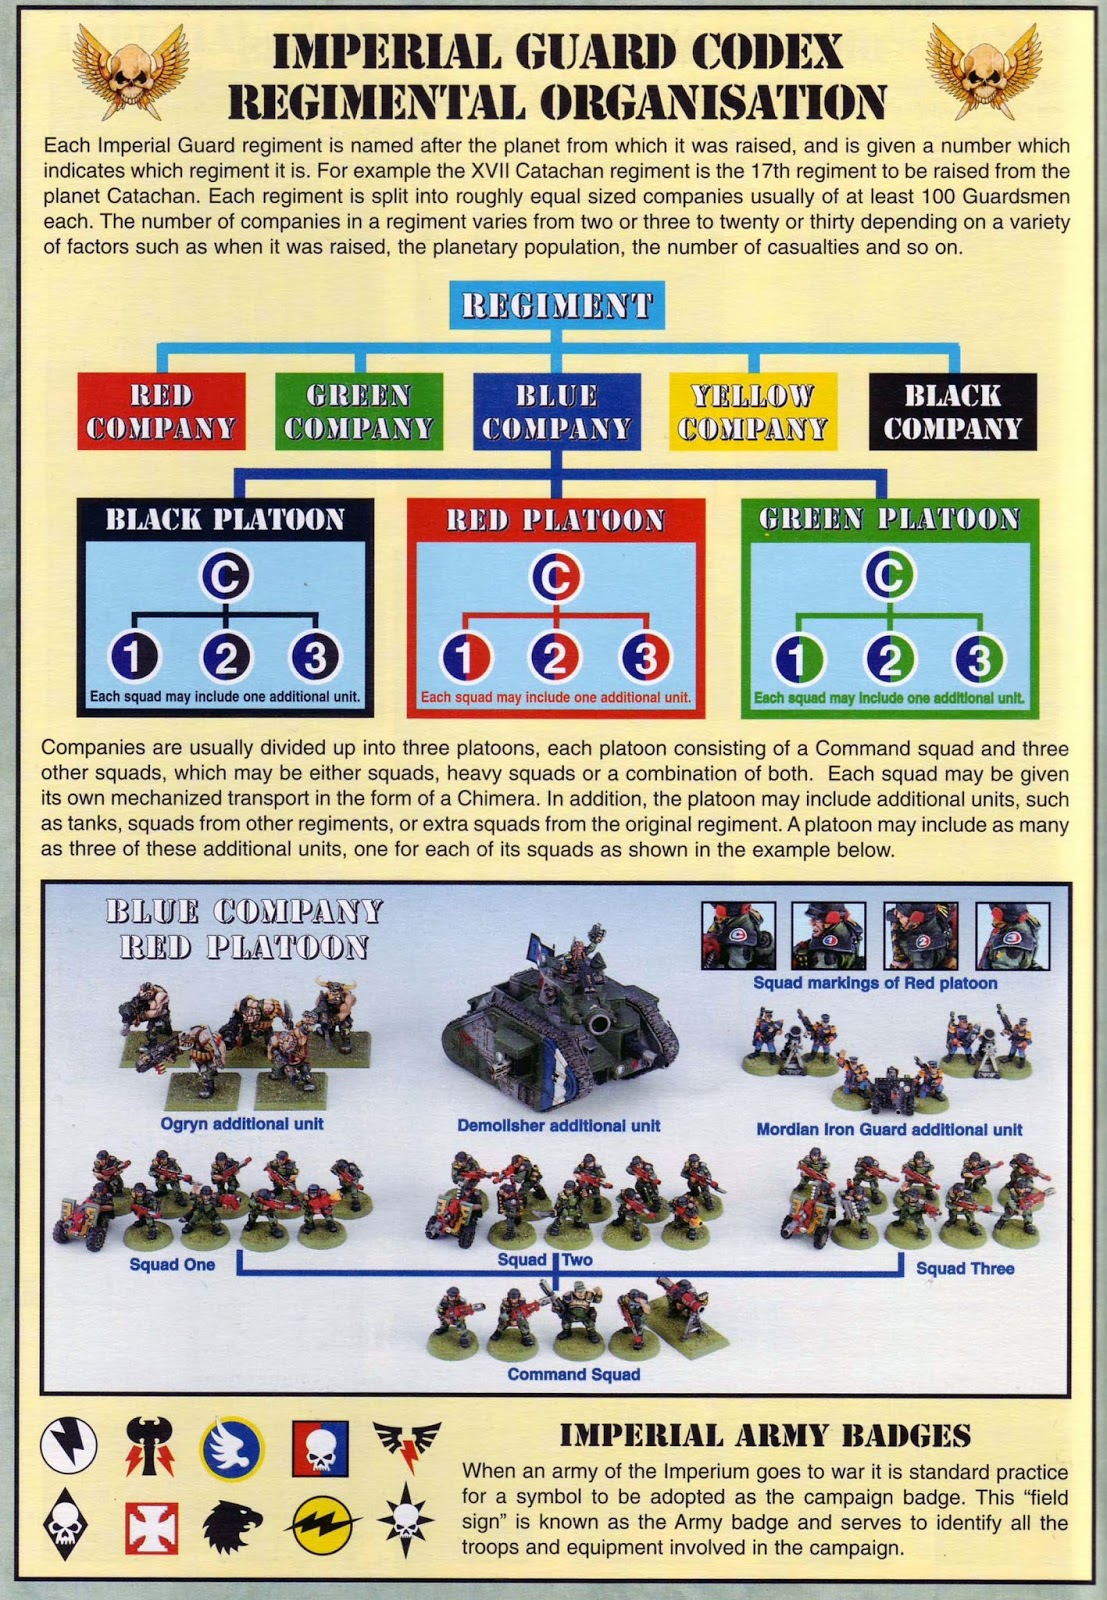 Guard designations - + ASTRA MILITARUM + - The Bolter and Chainsword